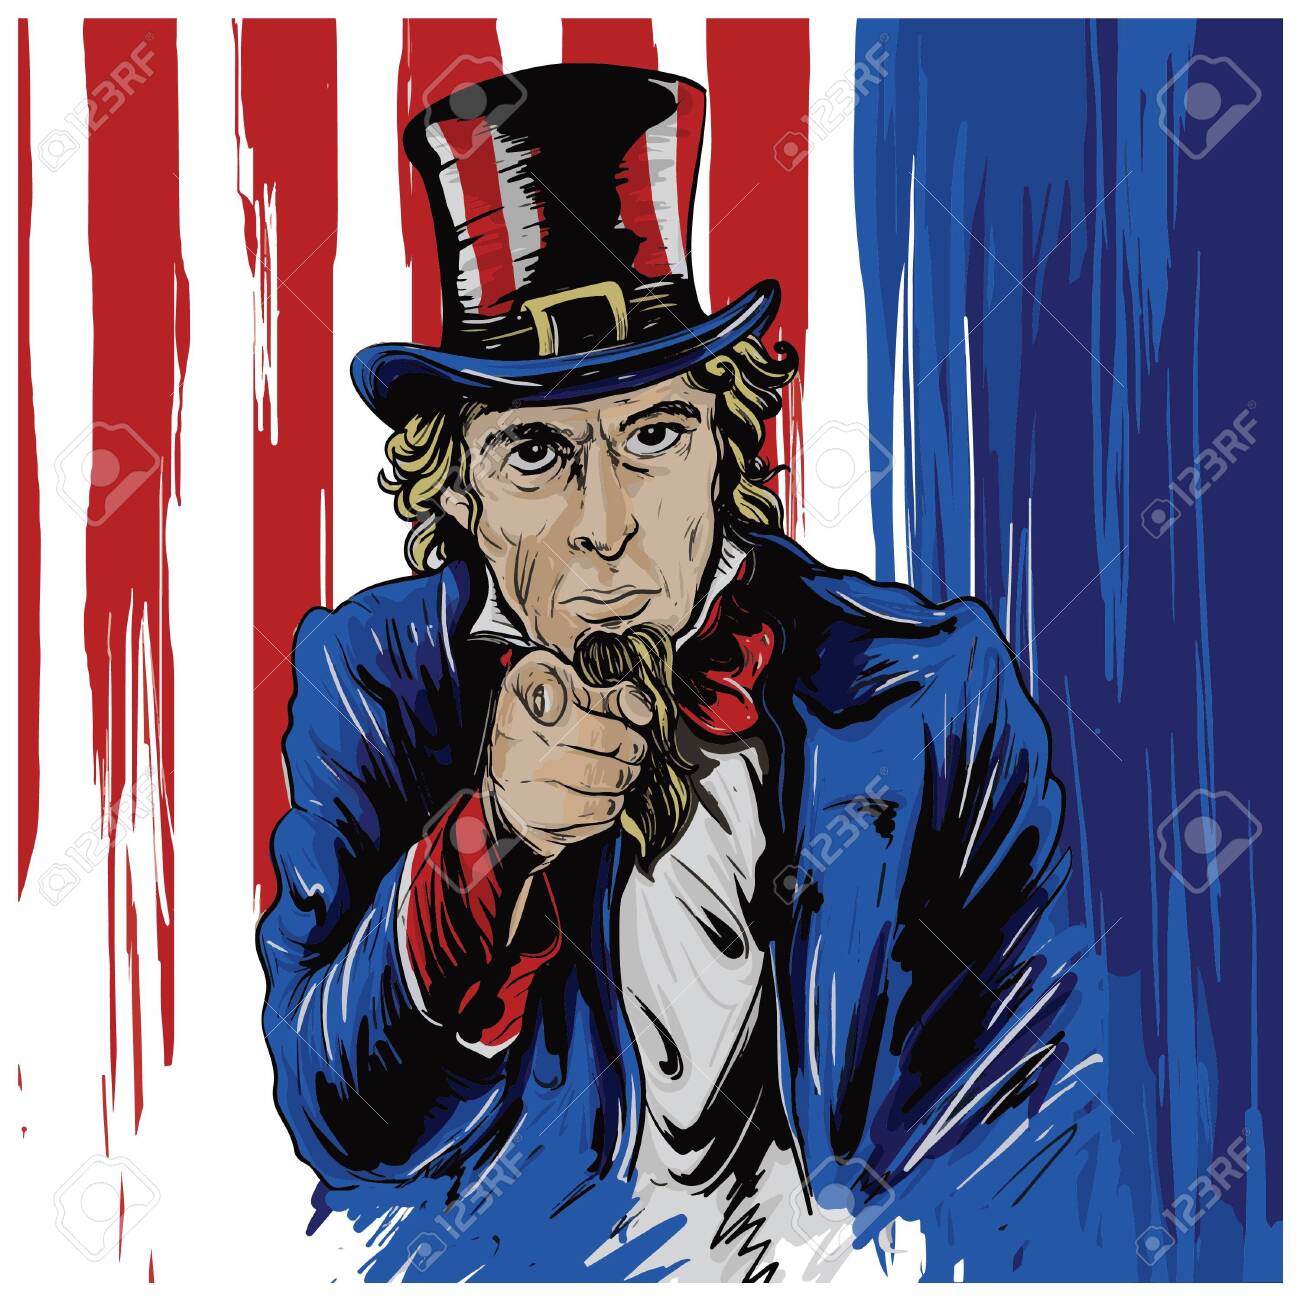 Painting Way Illustration Of Uncle Sam Character With The Usa